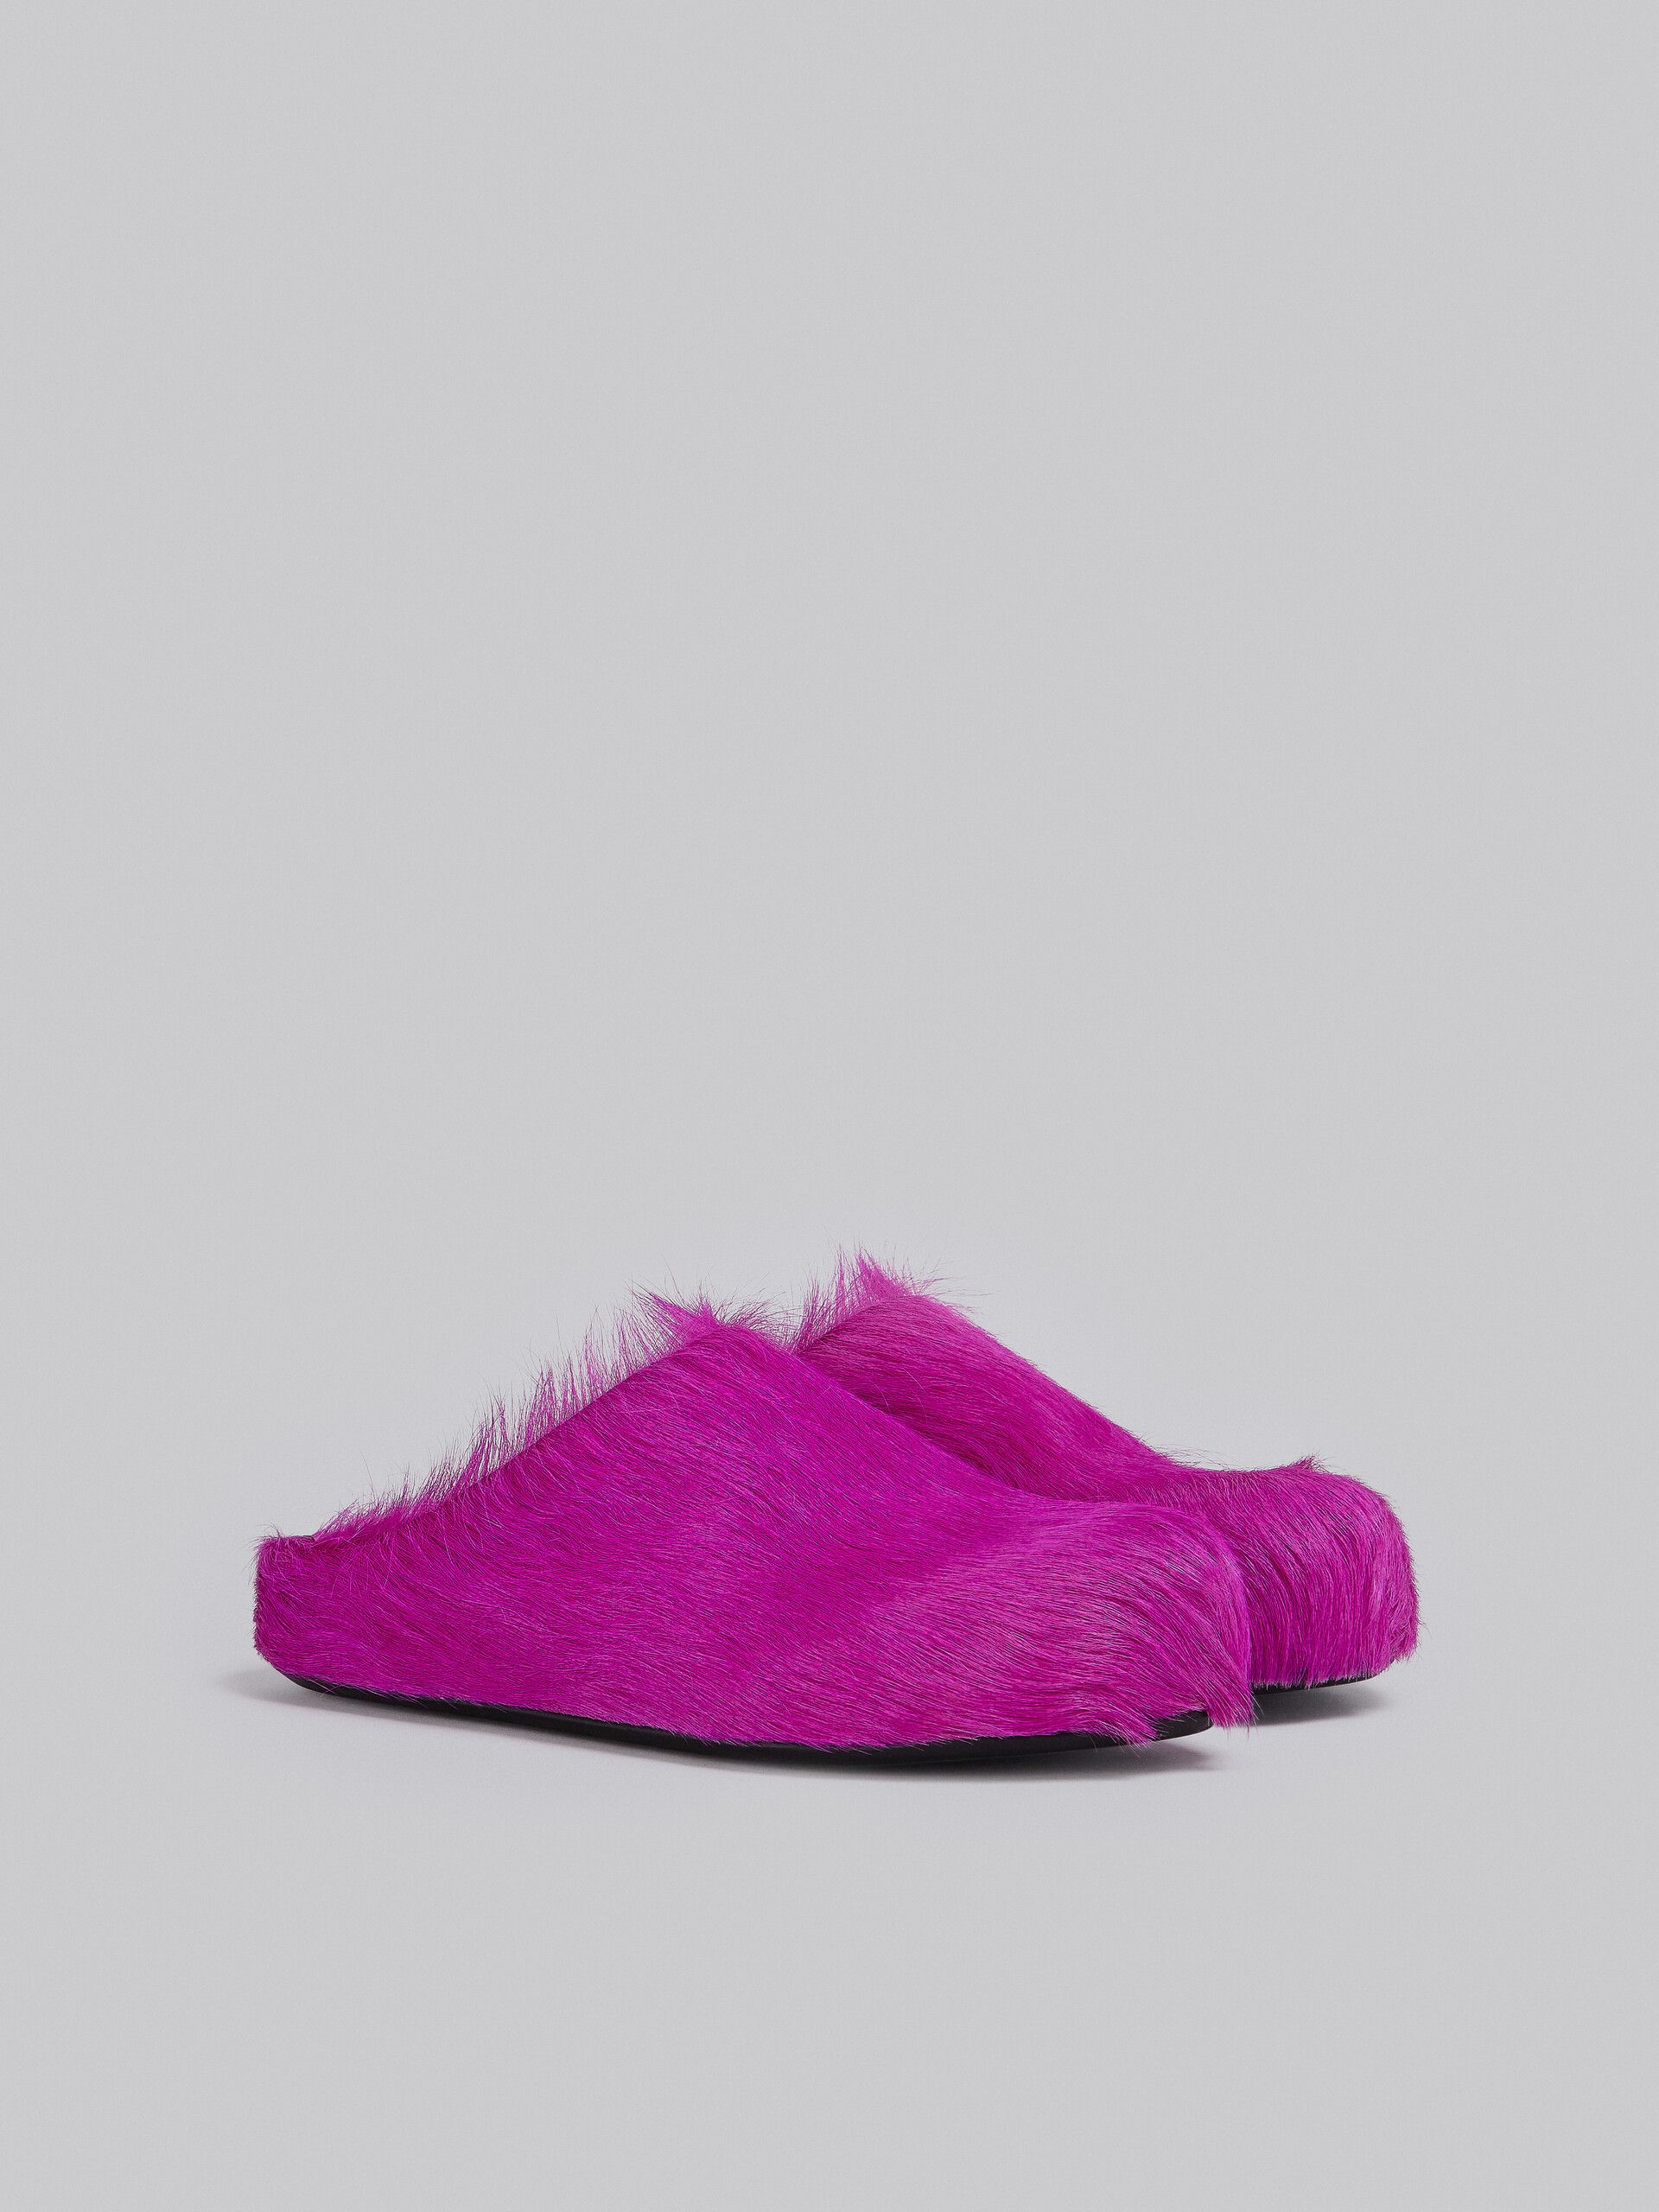 Pre-owned Marni Fur Sabot Mule Shoess Sandals In Fuchsia In Pink